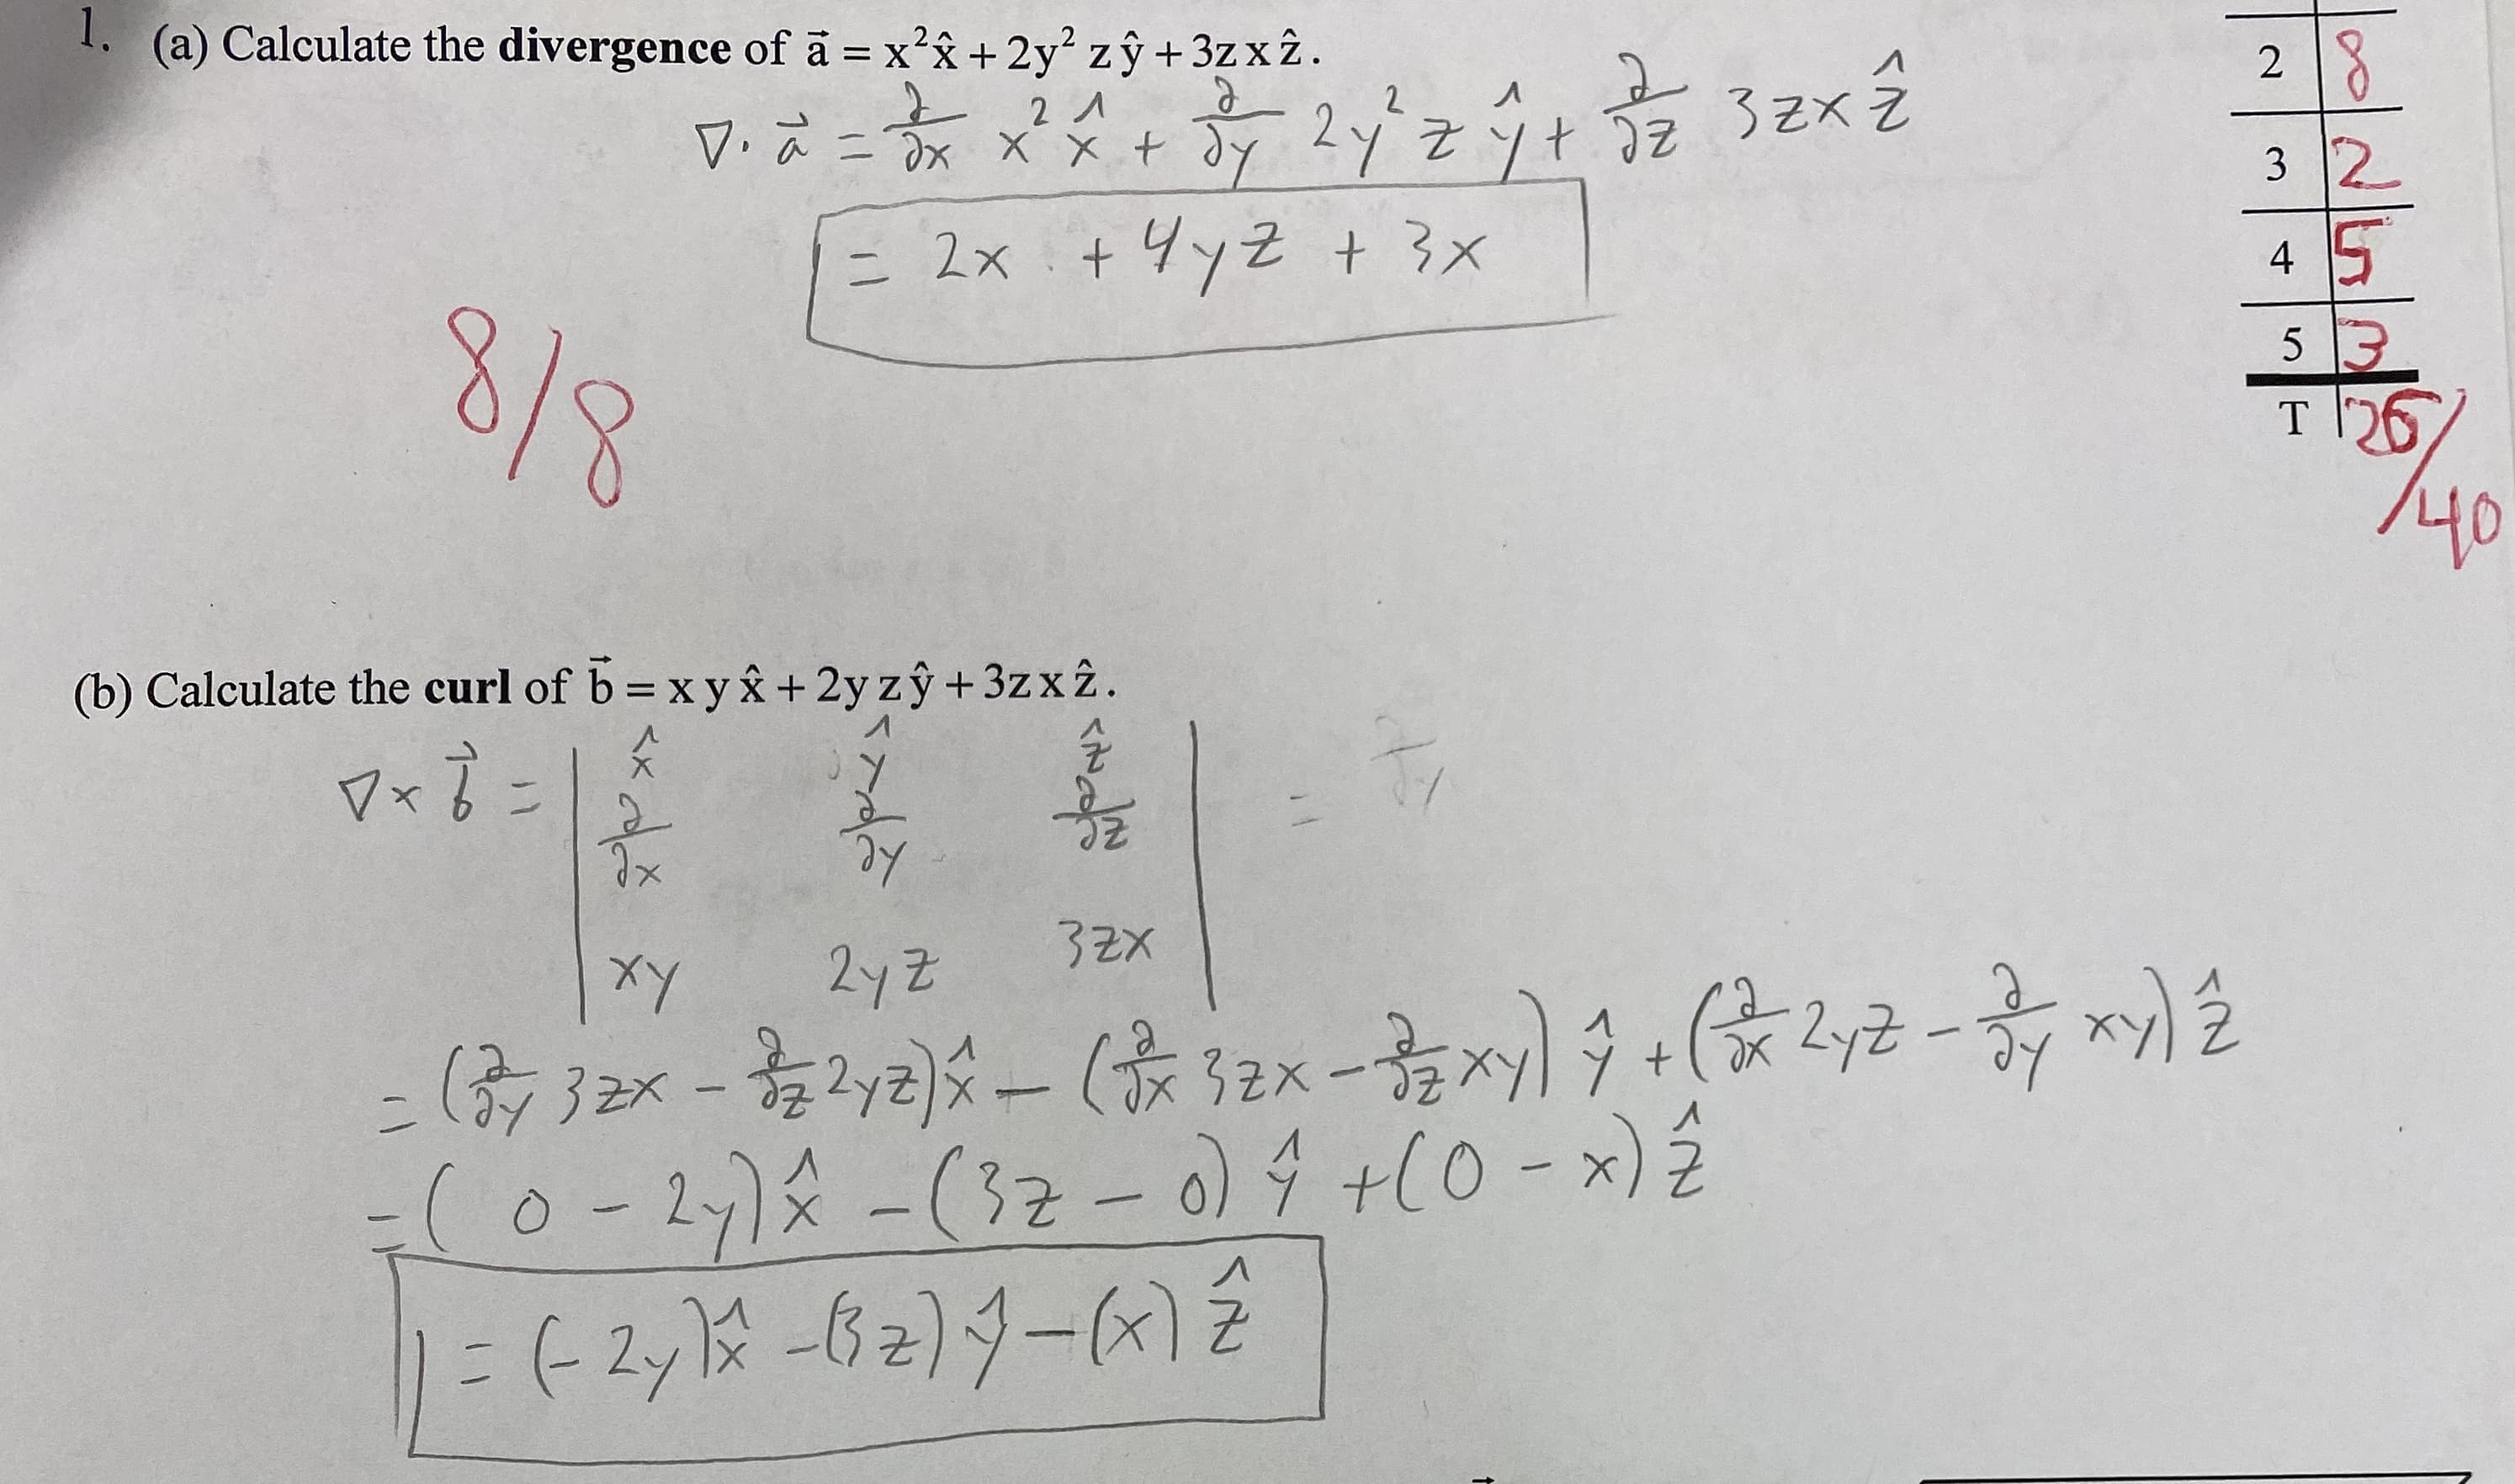 1. (a) Calculate the divergence of ā = x'â +2y' zŷ +3zx2.
.
2 8
2yZY+
Le t x x xe=A
3zx2
2 1
3 2
= 2x :+4yZ + 3x
4 5
8/8
5 3
T 26
40
(b) Calculate the curl of b = x y & + 2y zŷ + 3zx2.
Vx Z =
ze
32X
2yZ
2yZ-
XY
-(0-2)2-(32- 0) 4 +(0 - x)2
=62y1-62)9-6)Ź
